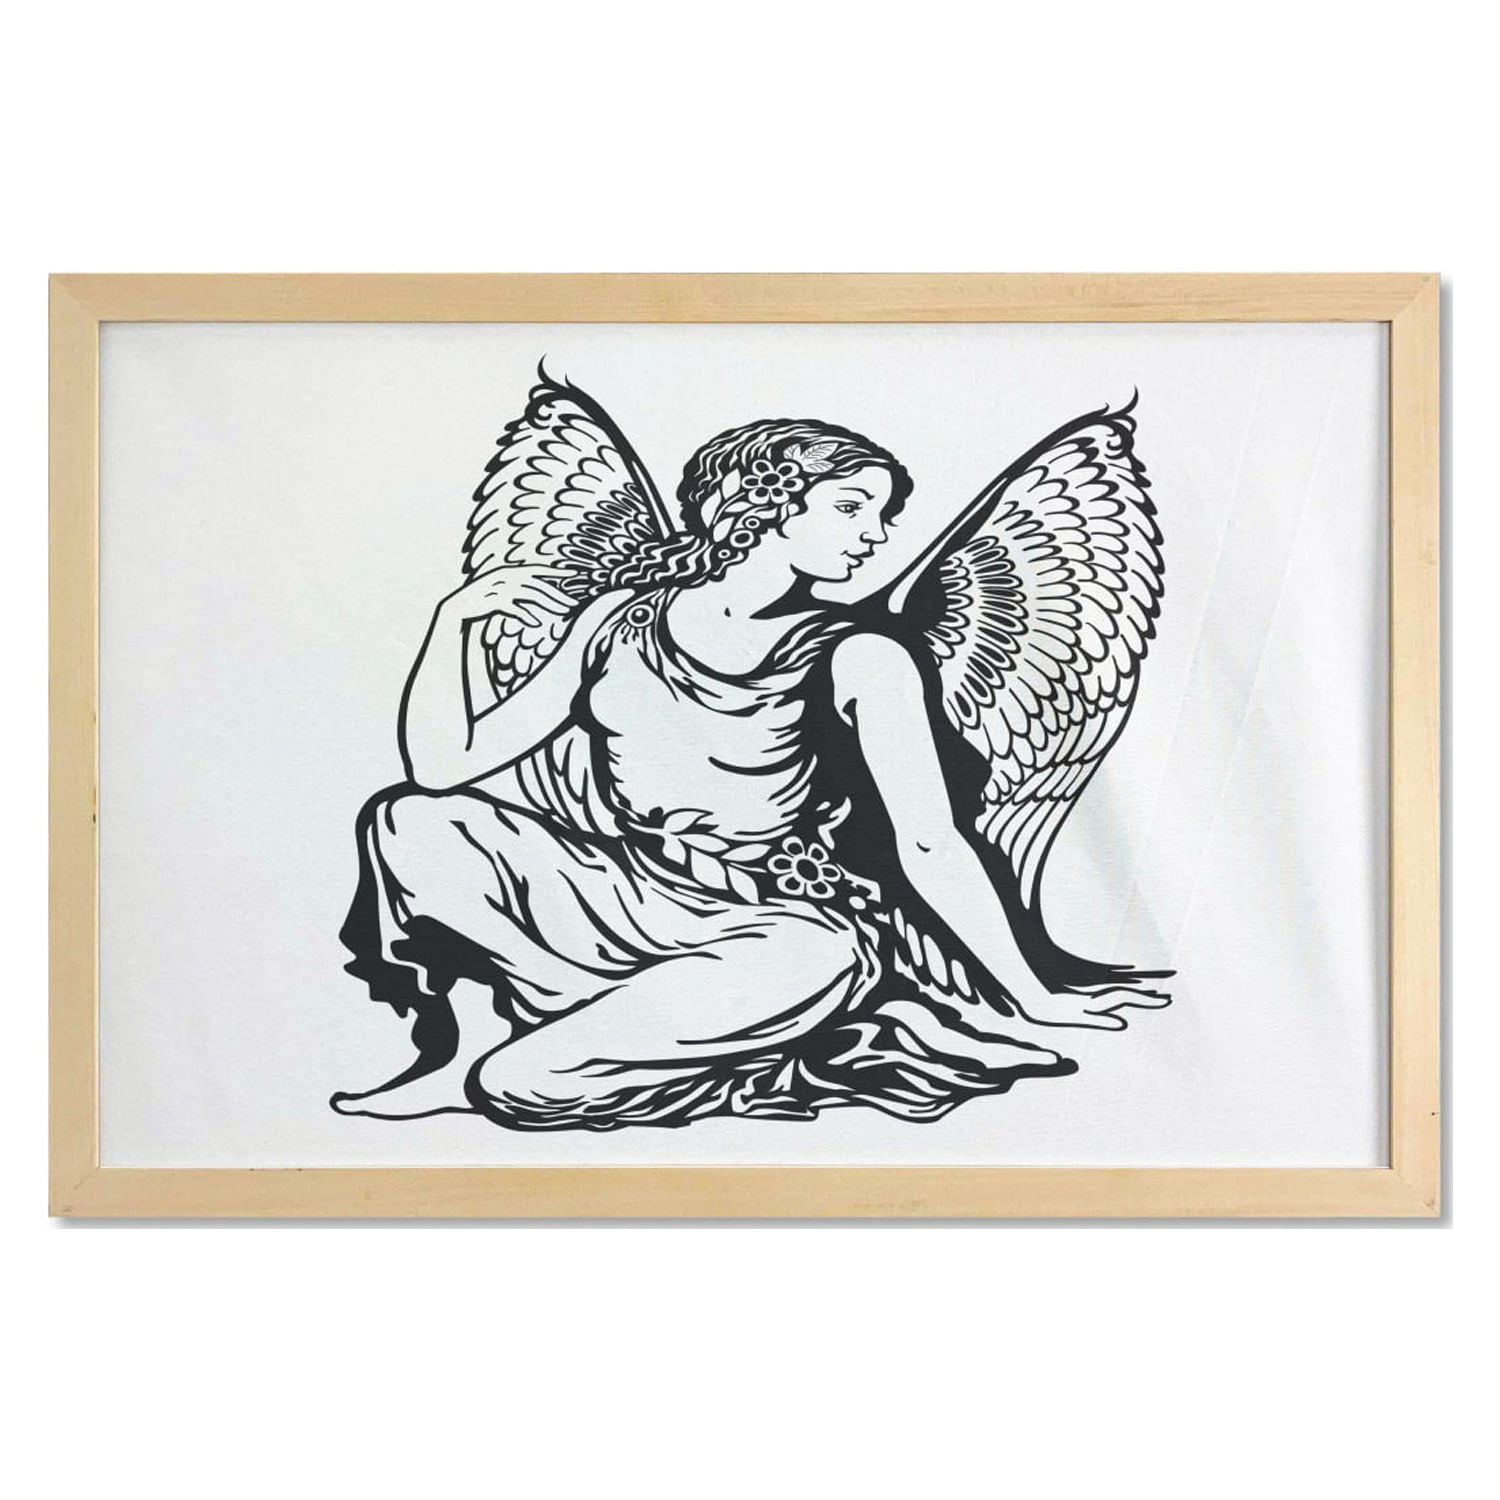 Zodiac Virgo Tapestry, Young Woman with Angel Wings Monochrome Tattoo Art  Design, Fabric Wall Hanging Decor for Bedroom Living Room Dorm, 5 Sizes,  Black and White, by Ambesonne - Walmart.com